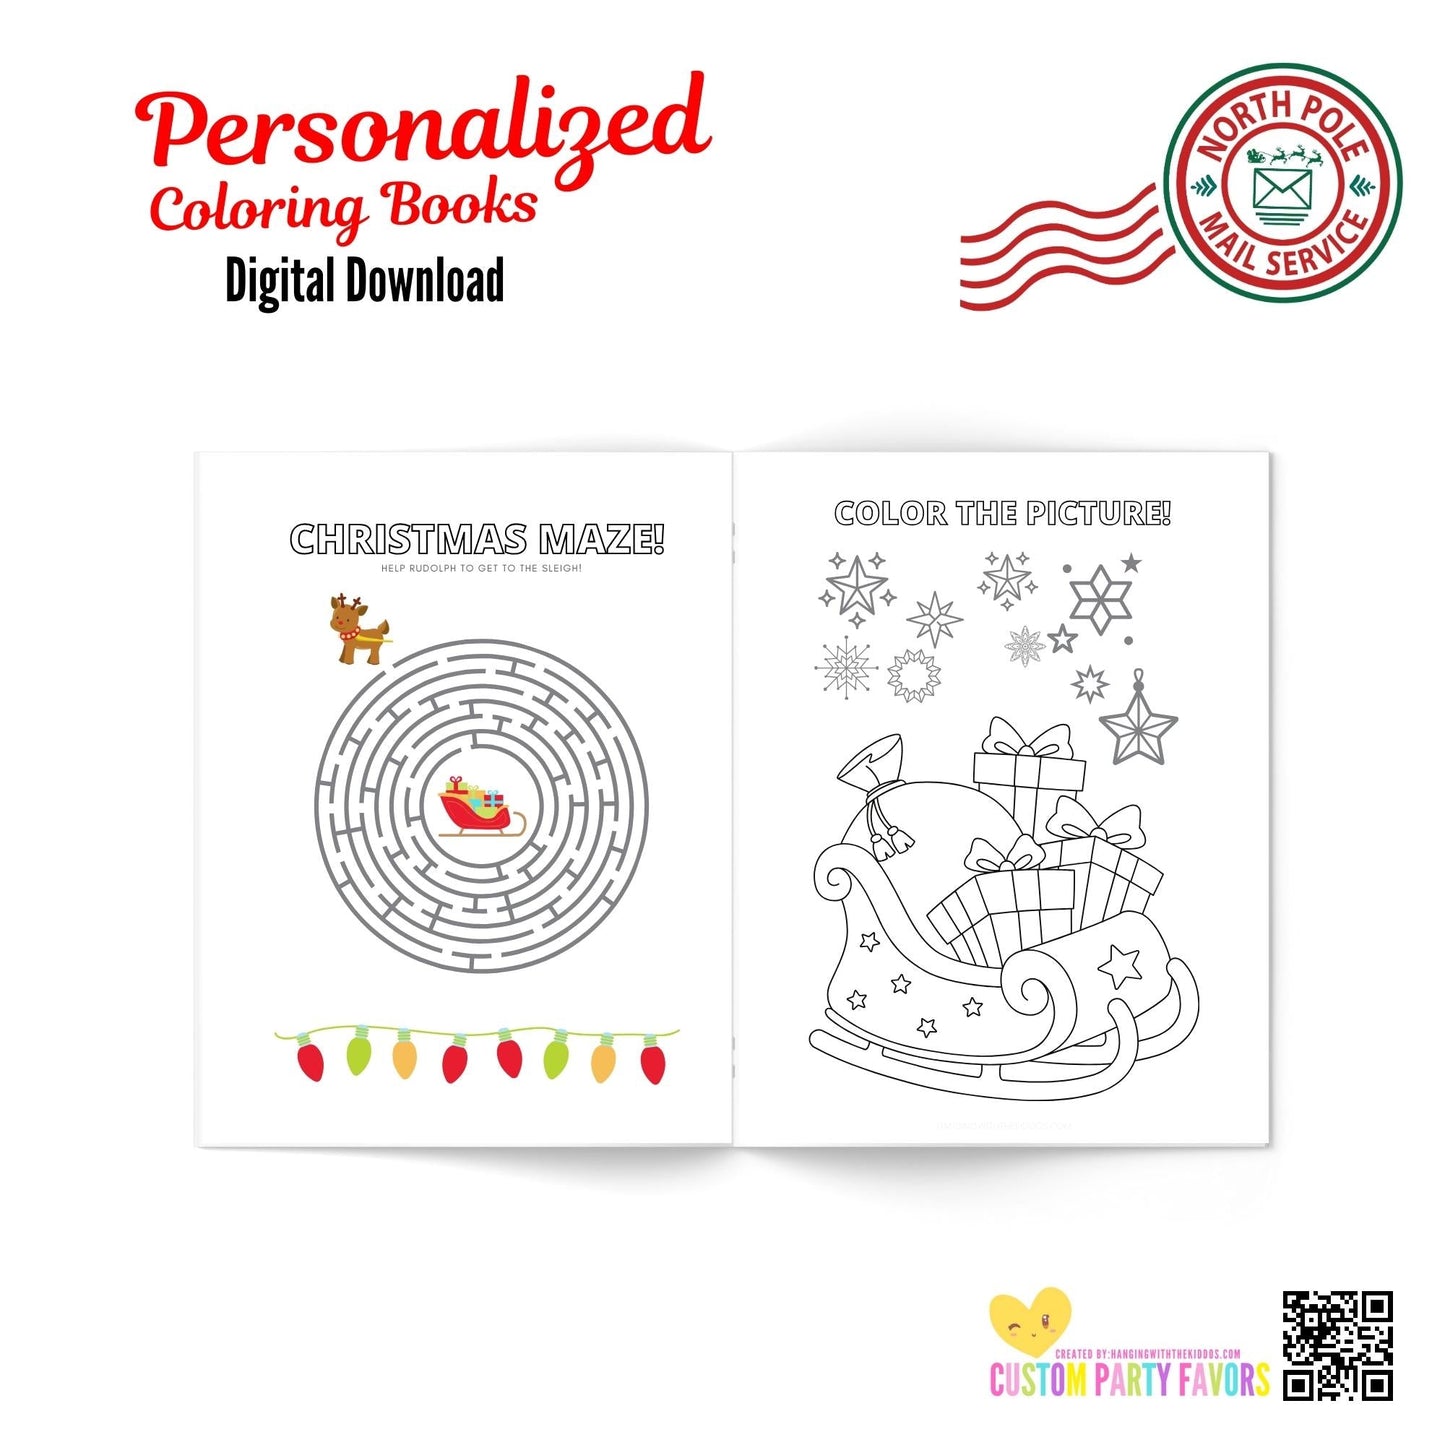 Digital Download|Personalized Christmas Coloring & Activity Books|03